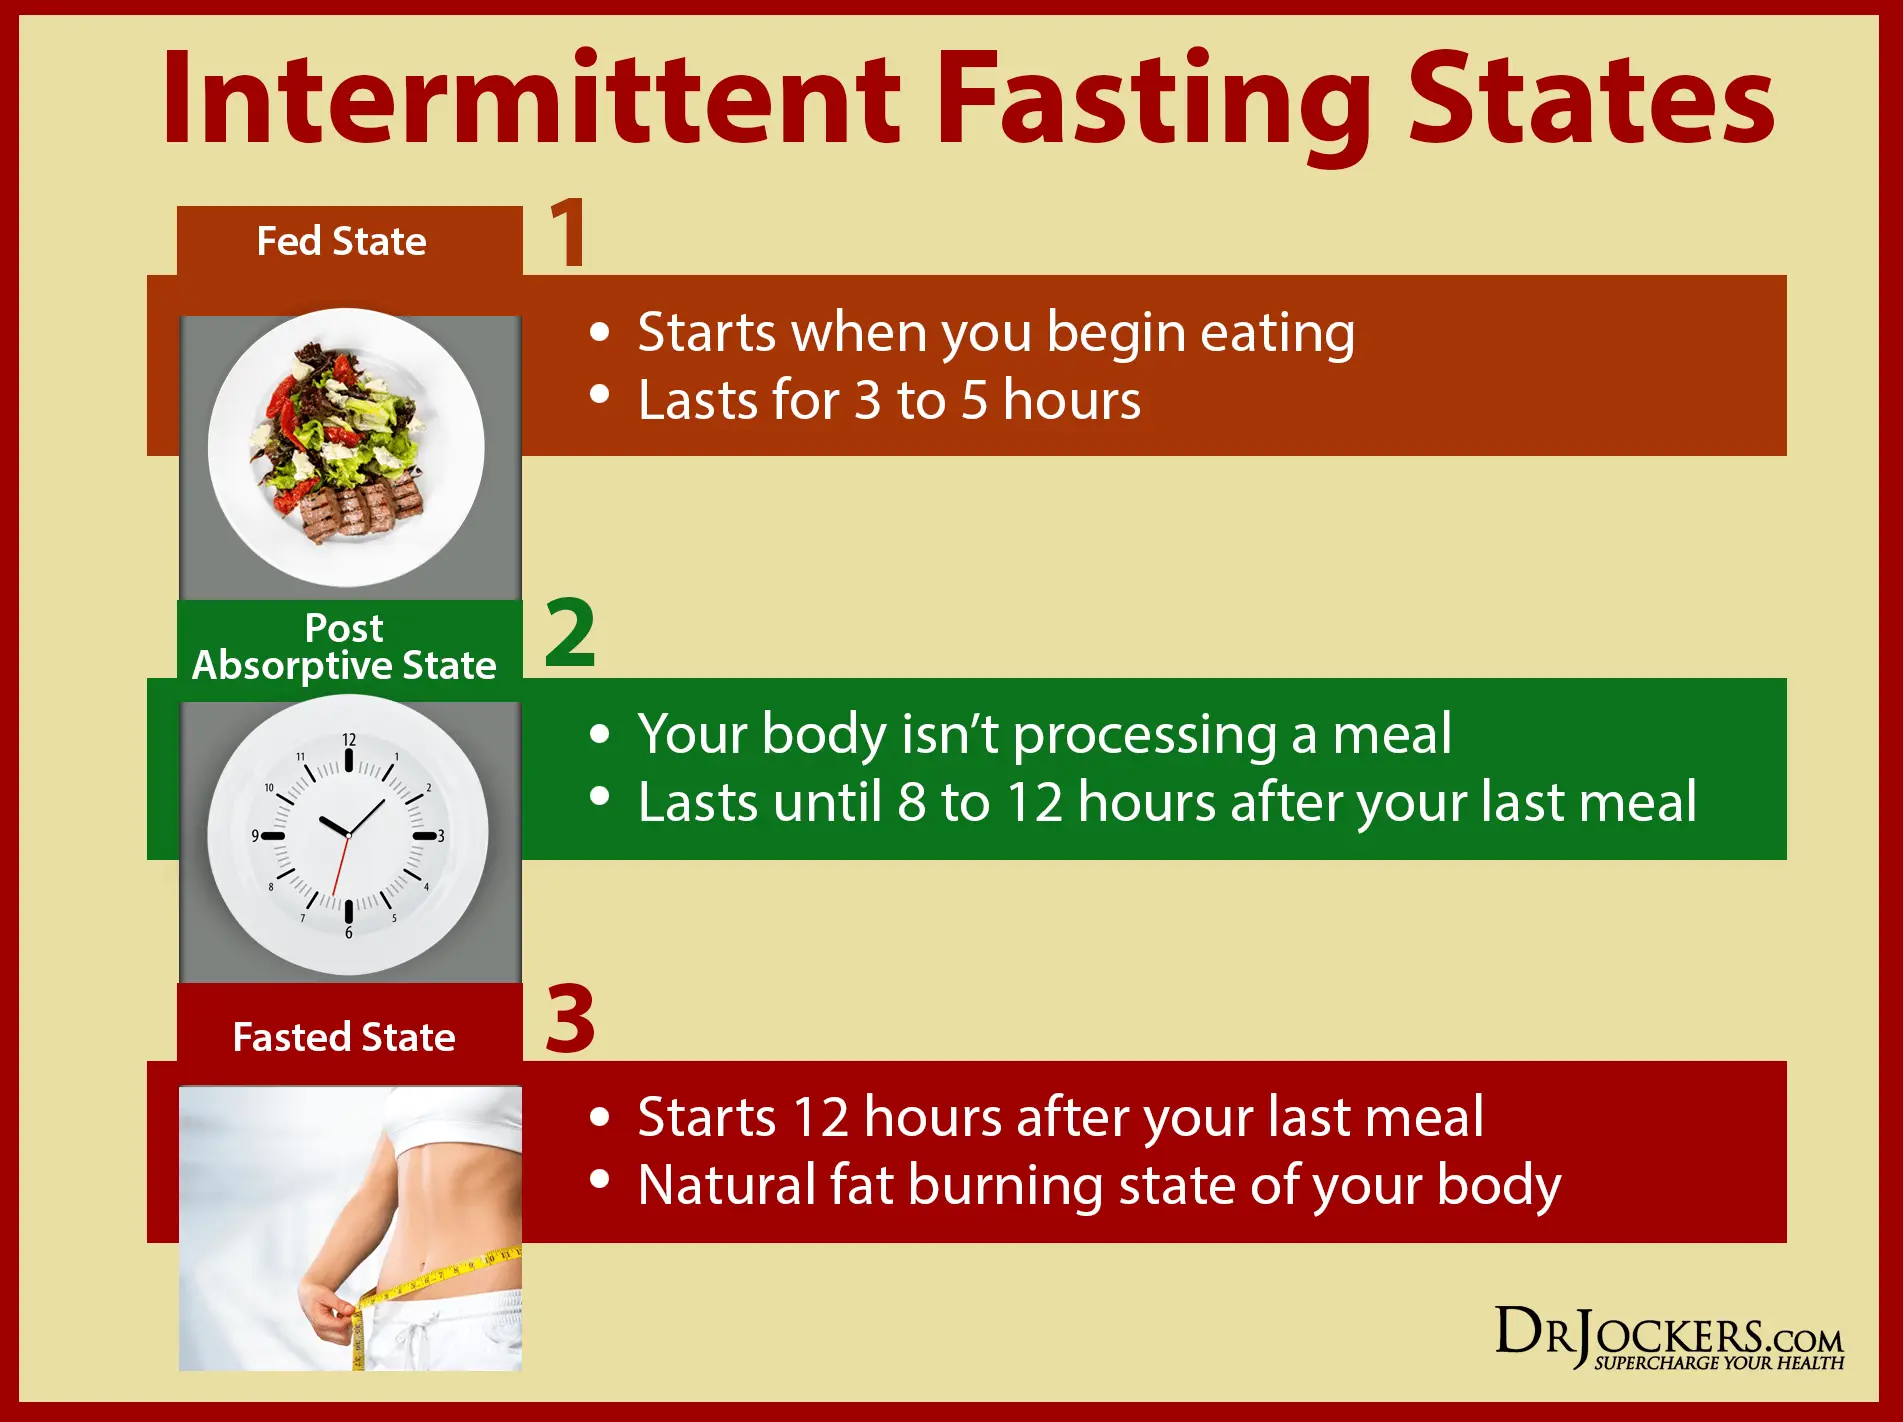 5 Healing Benefits of Intermittent Fasting